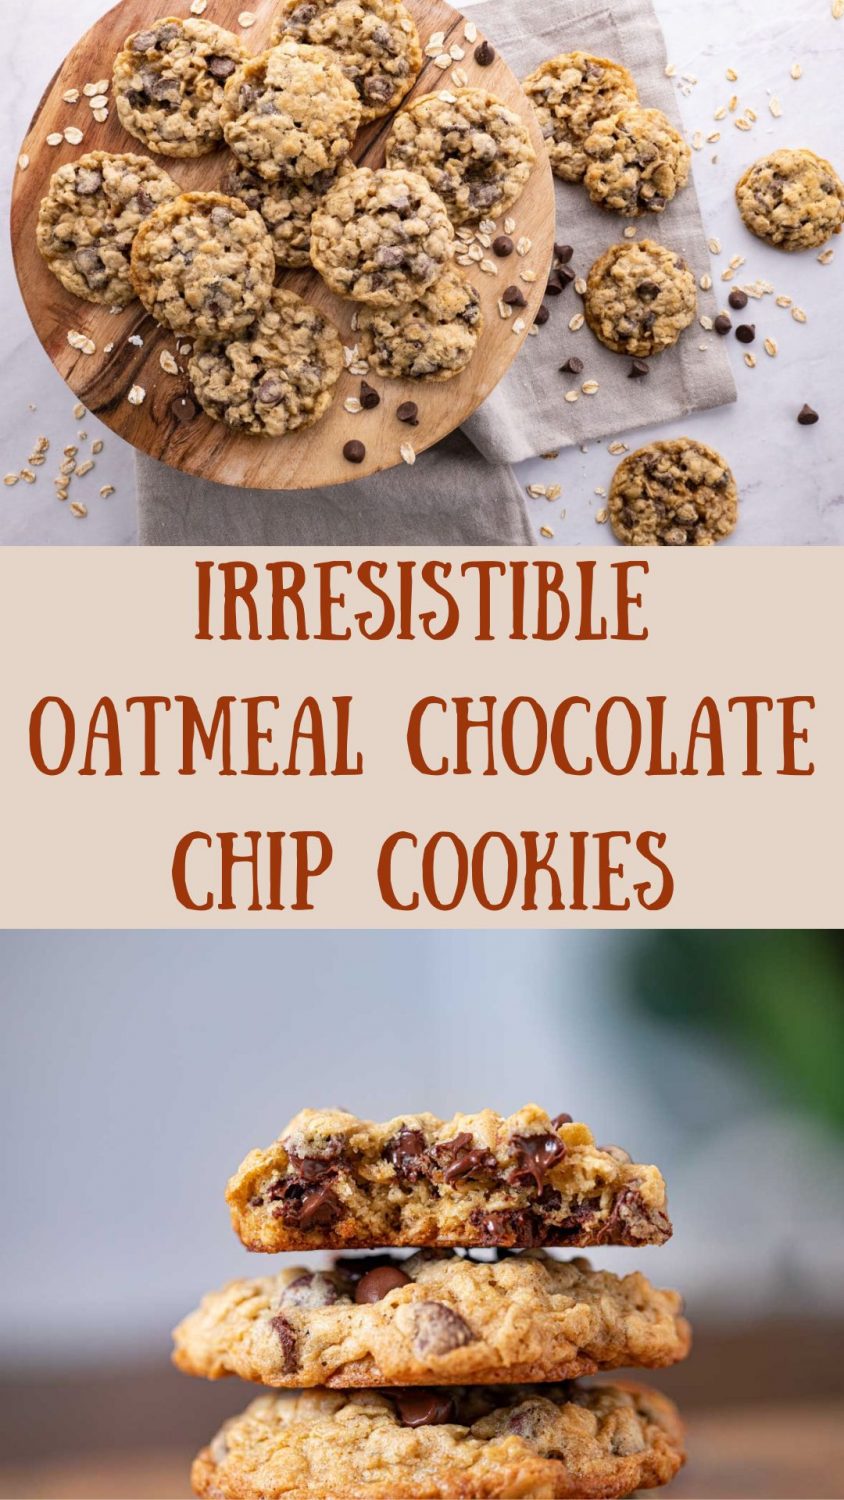 Irresistible Oatmeal Chocolate Chip Cookies